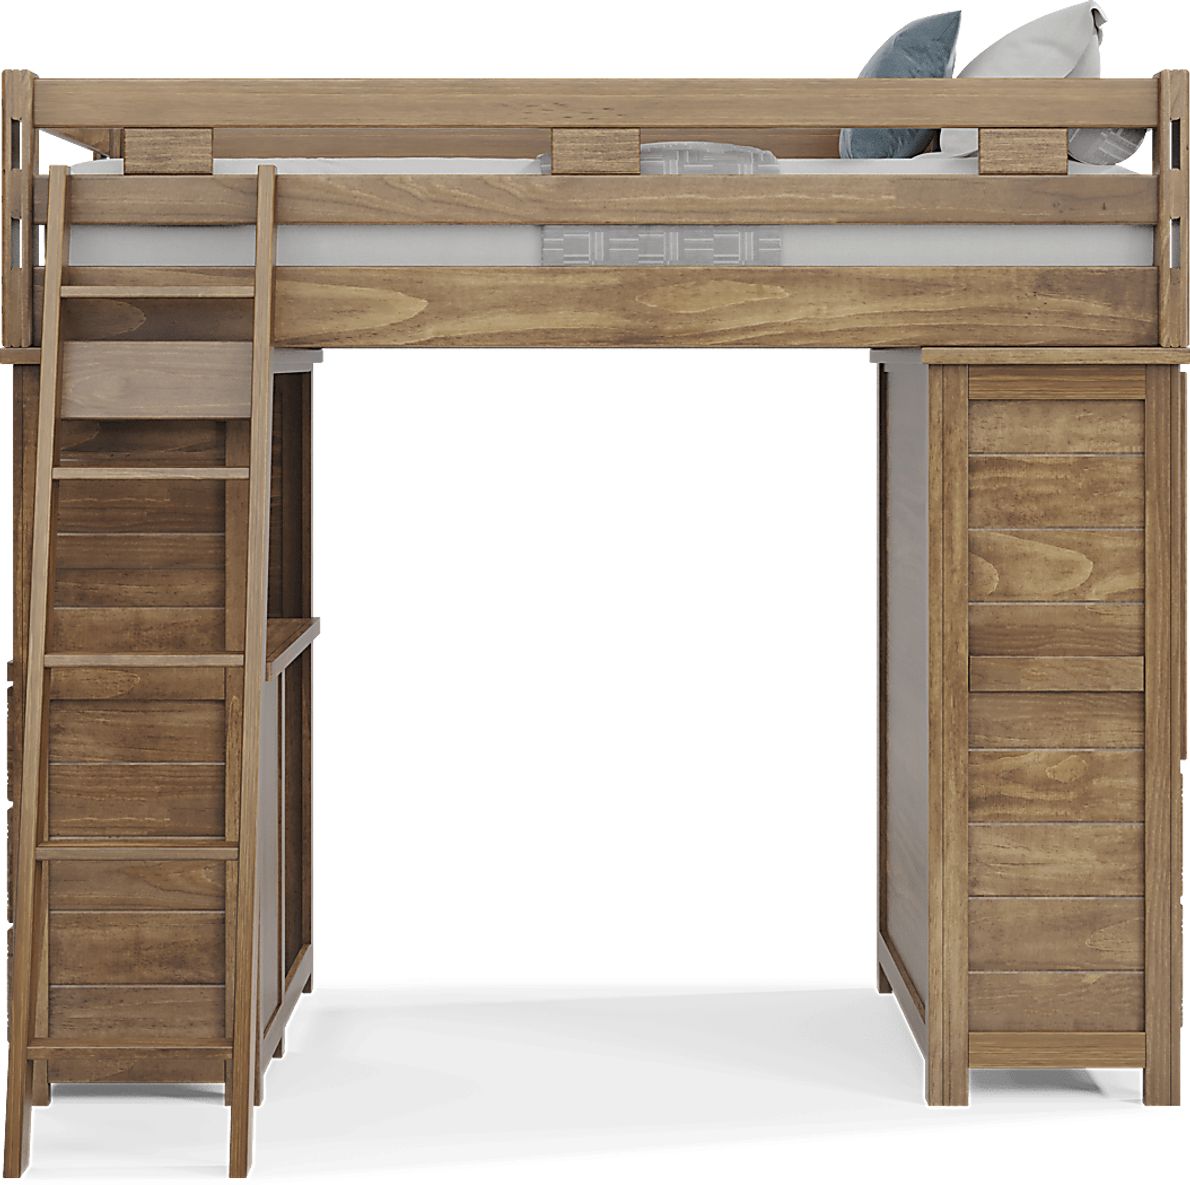 Kids Creekside 2.0 Chestnut Twin Loft with Loft Chest and Desk